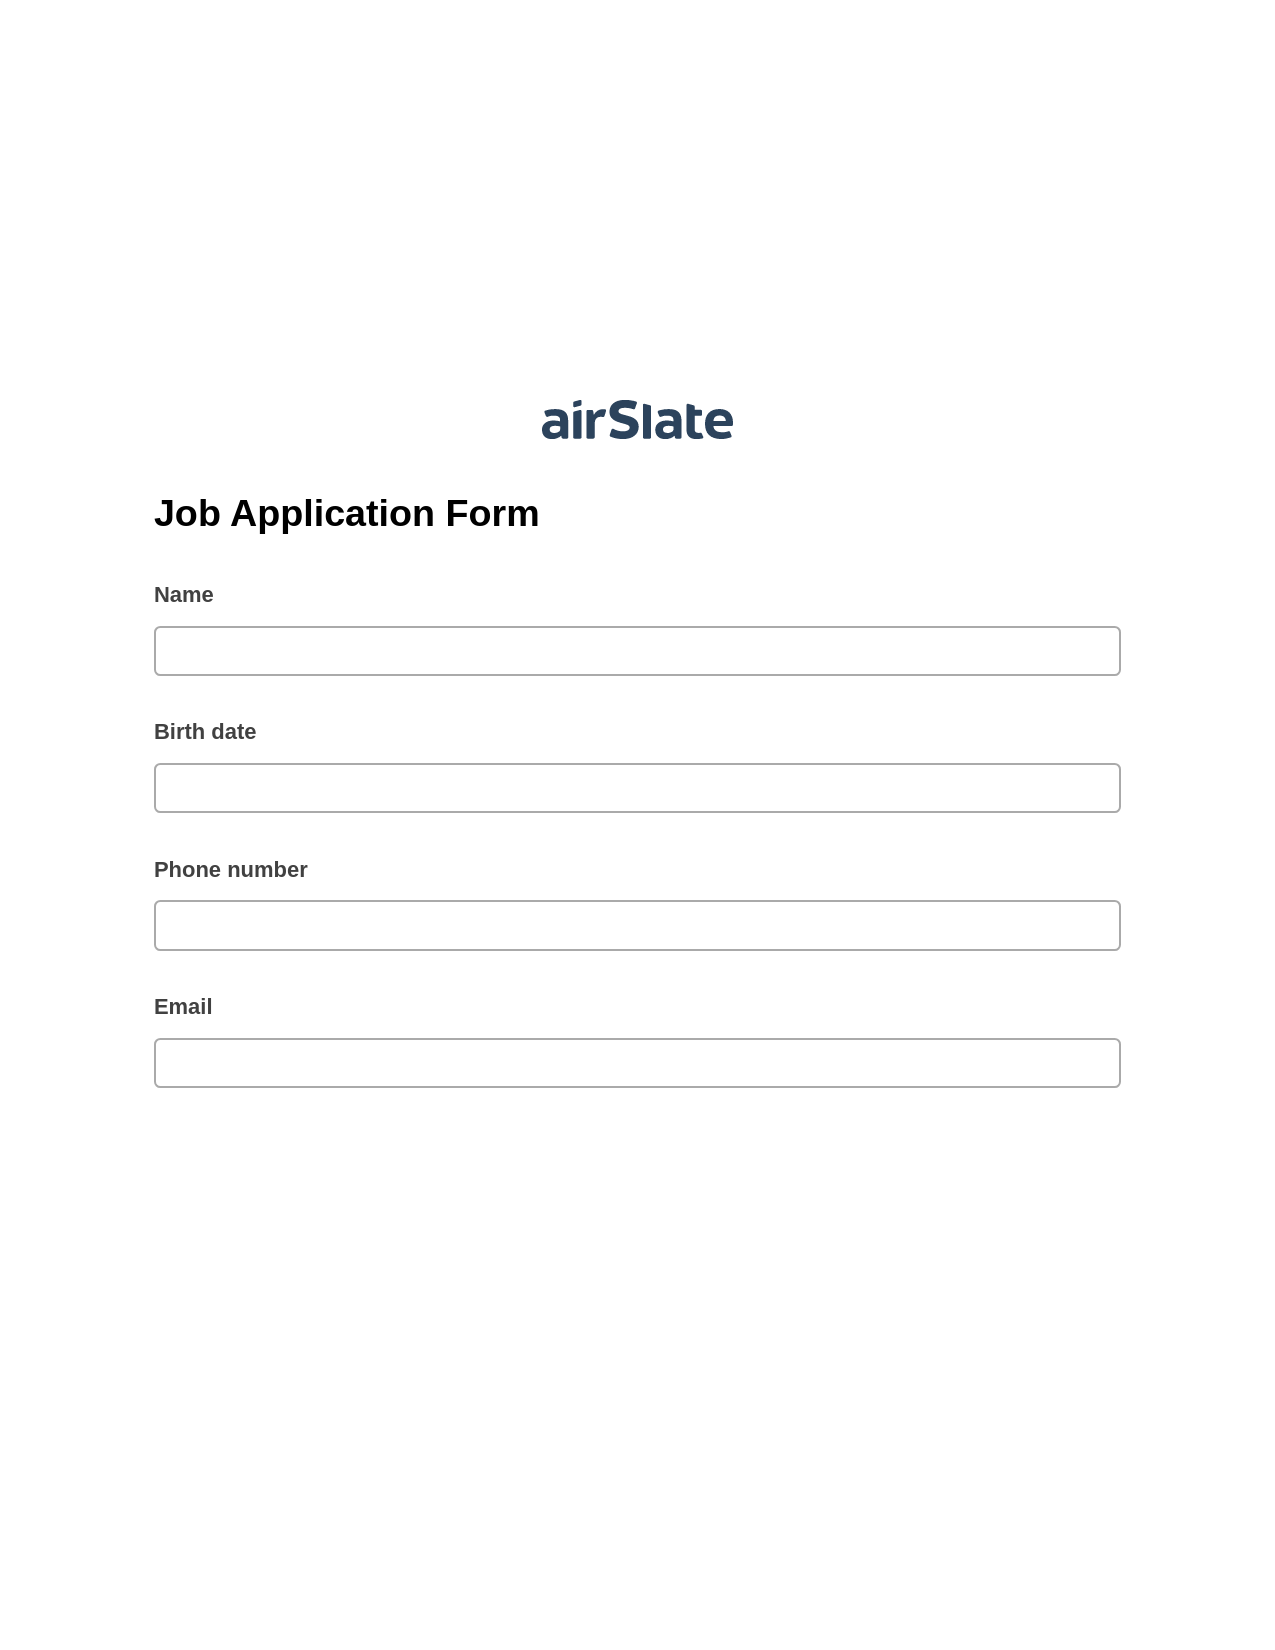 Job Application Form Pre-fill from another Slate Bot, Update NetSuite Records Bot, Export to Salesforce Bot